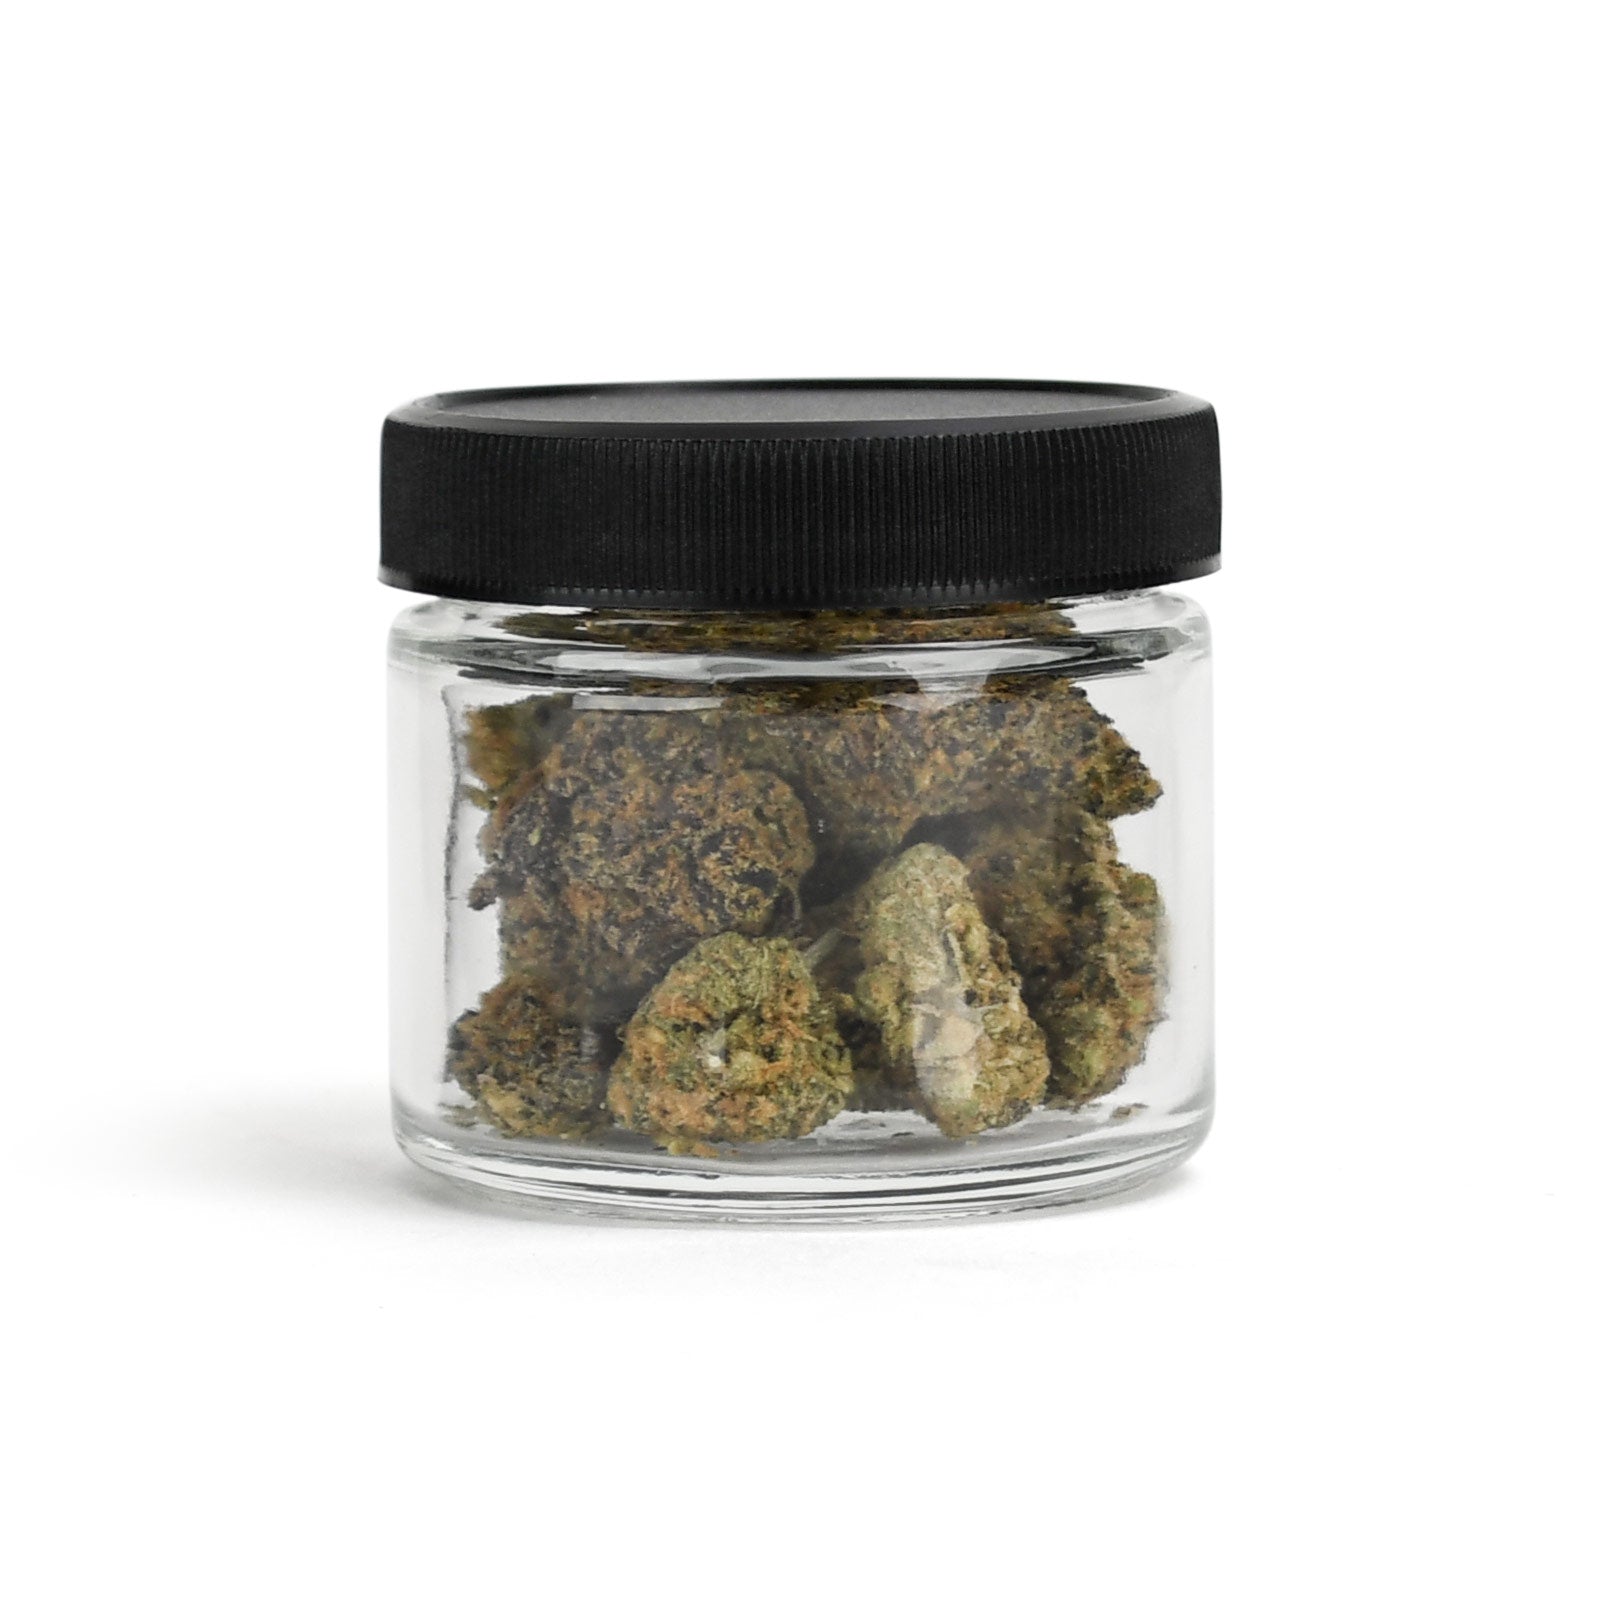 2oz Glass Jars With Black Caps - 3.5 Grams - 1 Count